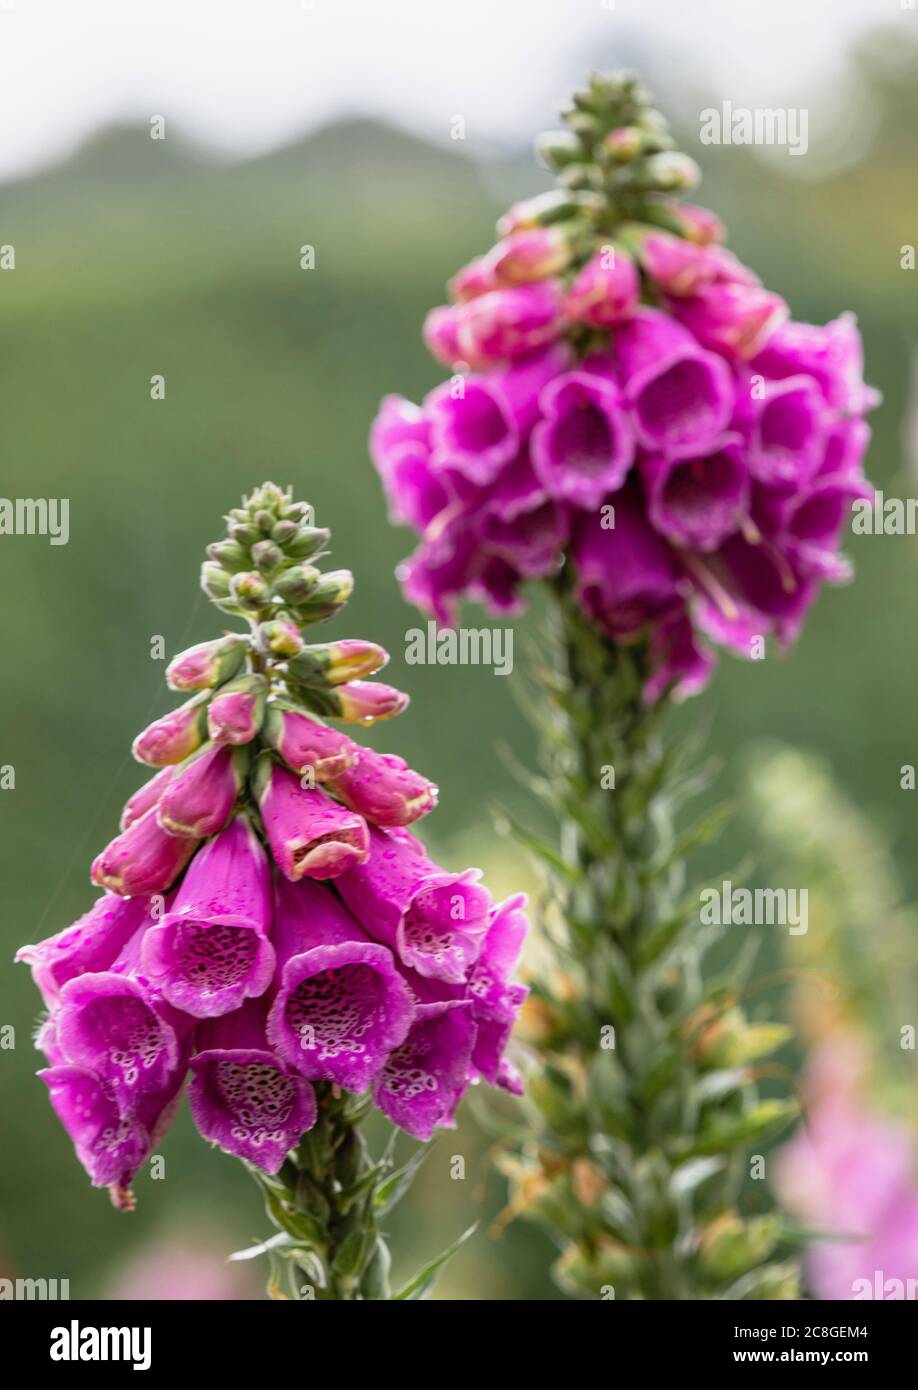 Foxglove, Digitalis, Spire shaped flowers growing outdoor in garden covered in water droplets. Stock Photo